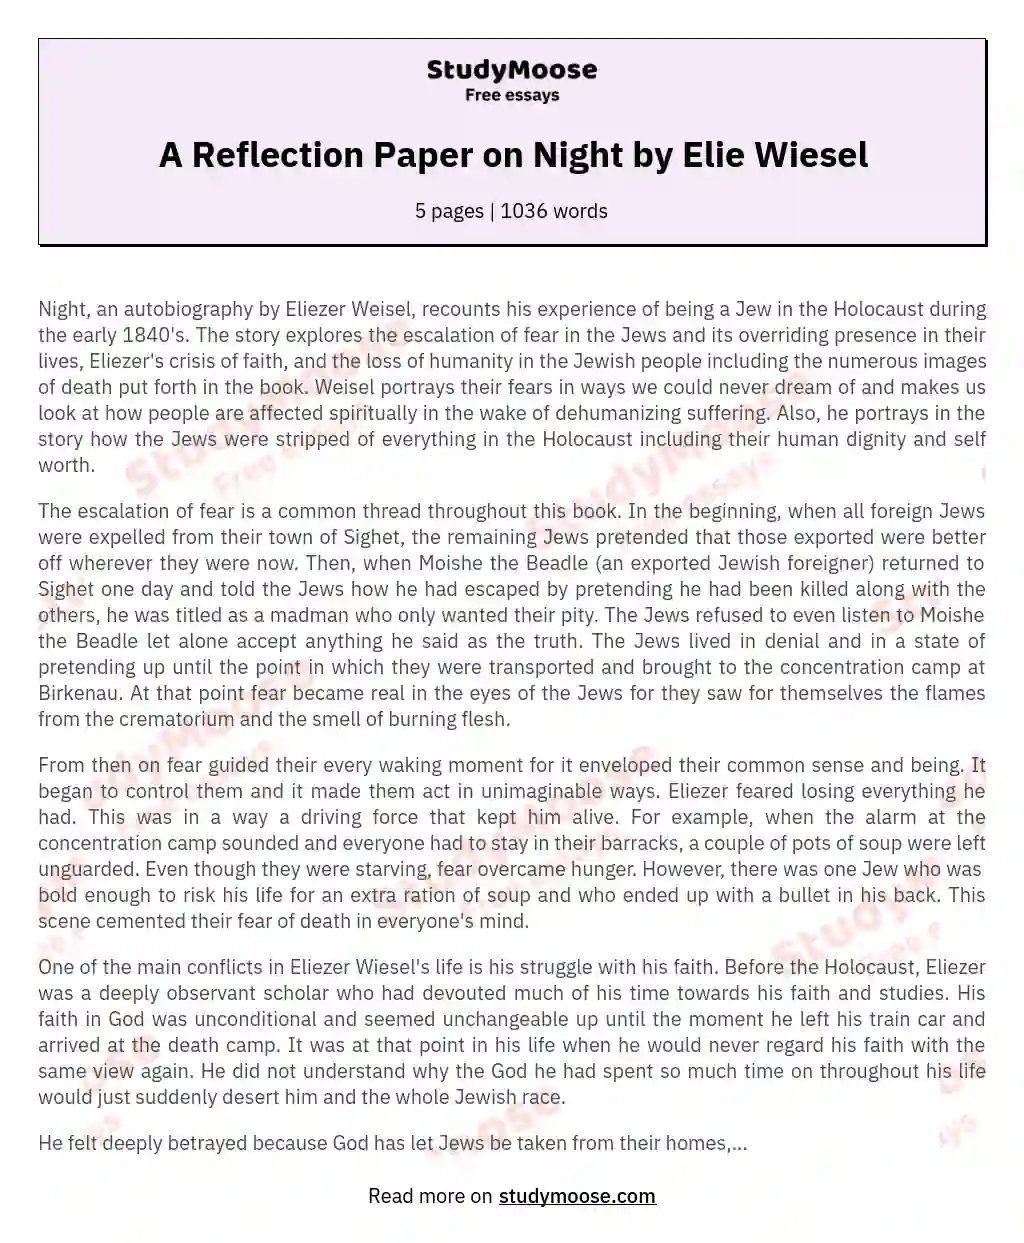 A Reflection Paper on Night by Elie Wiesel essay